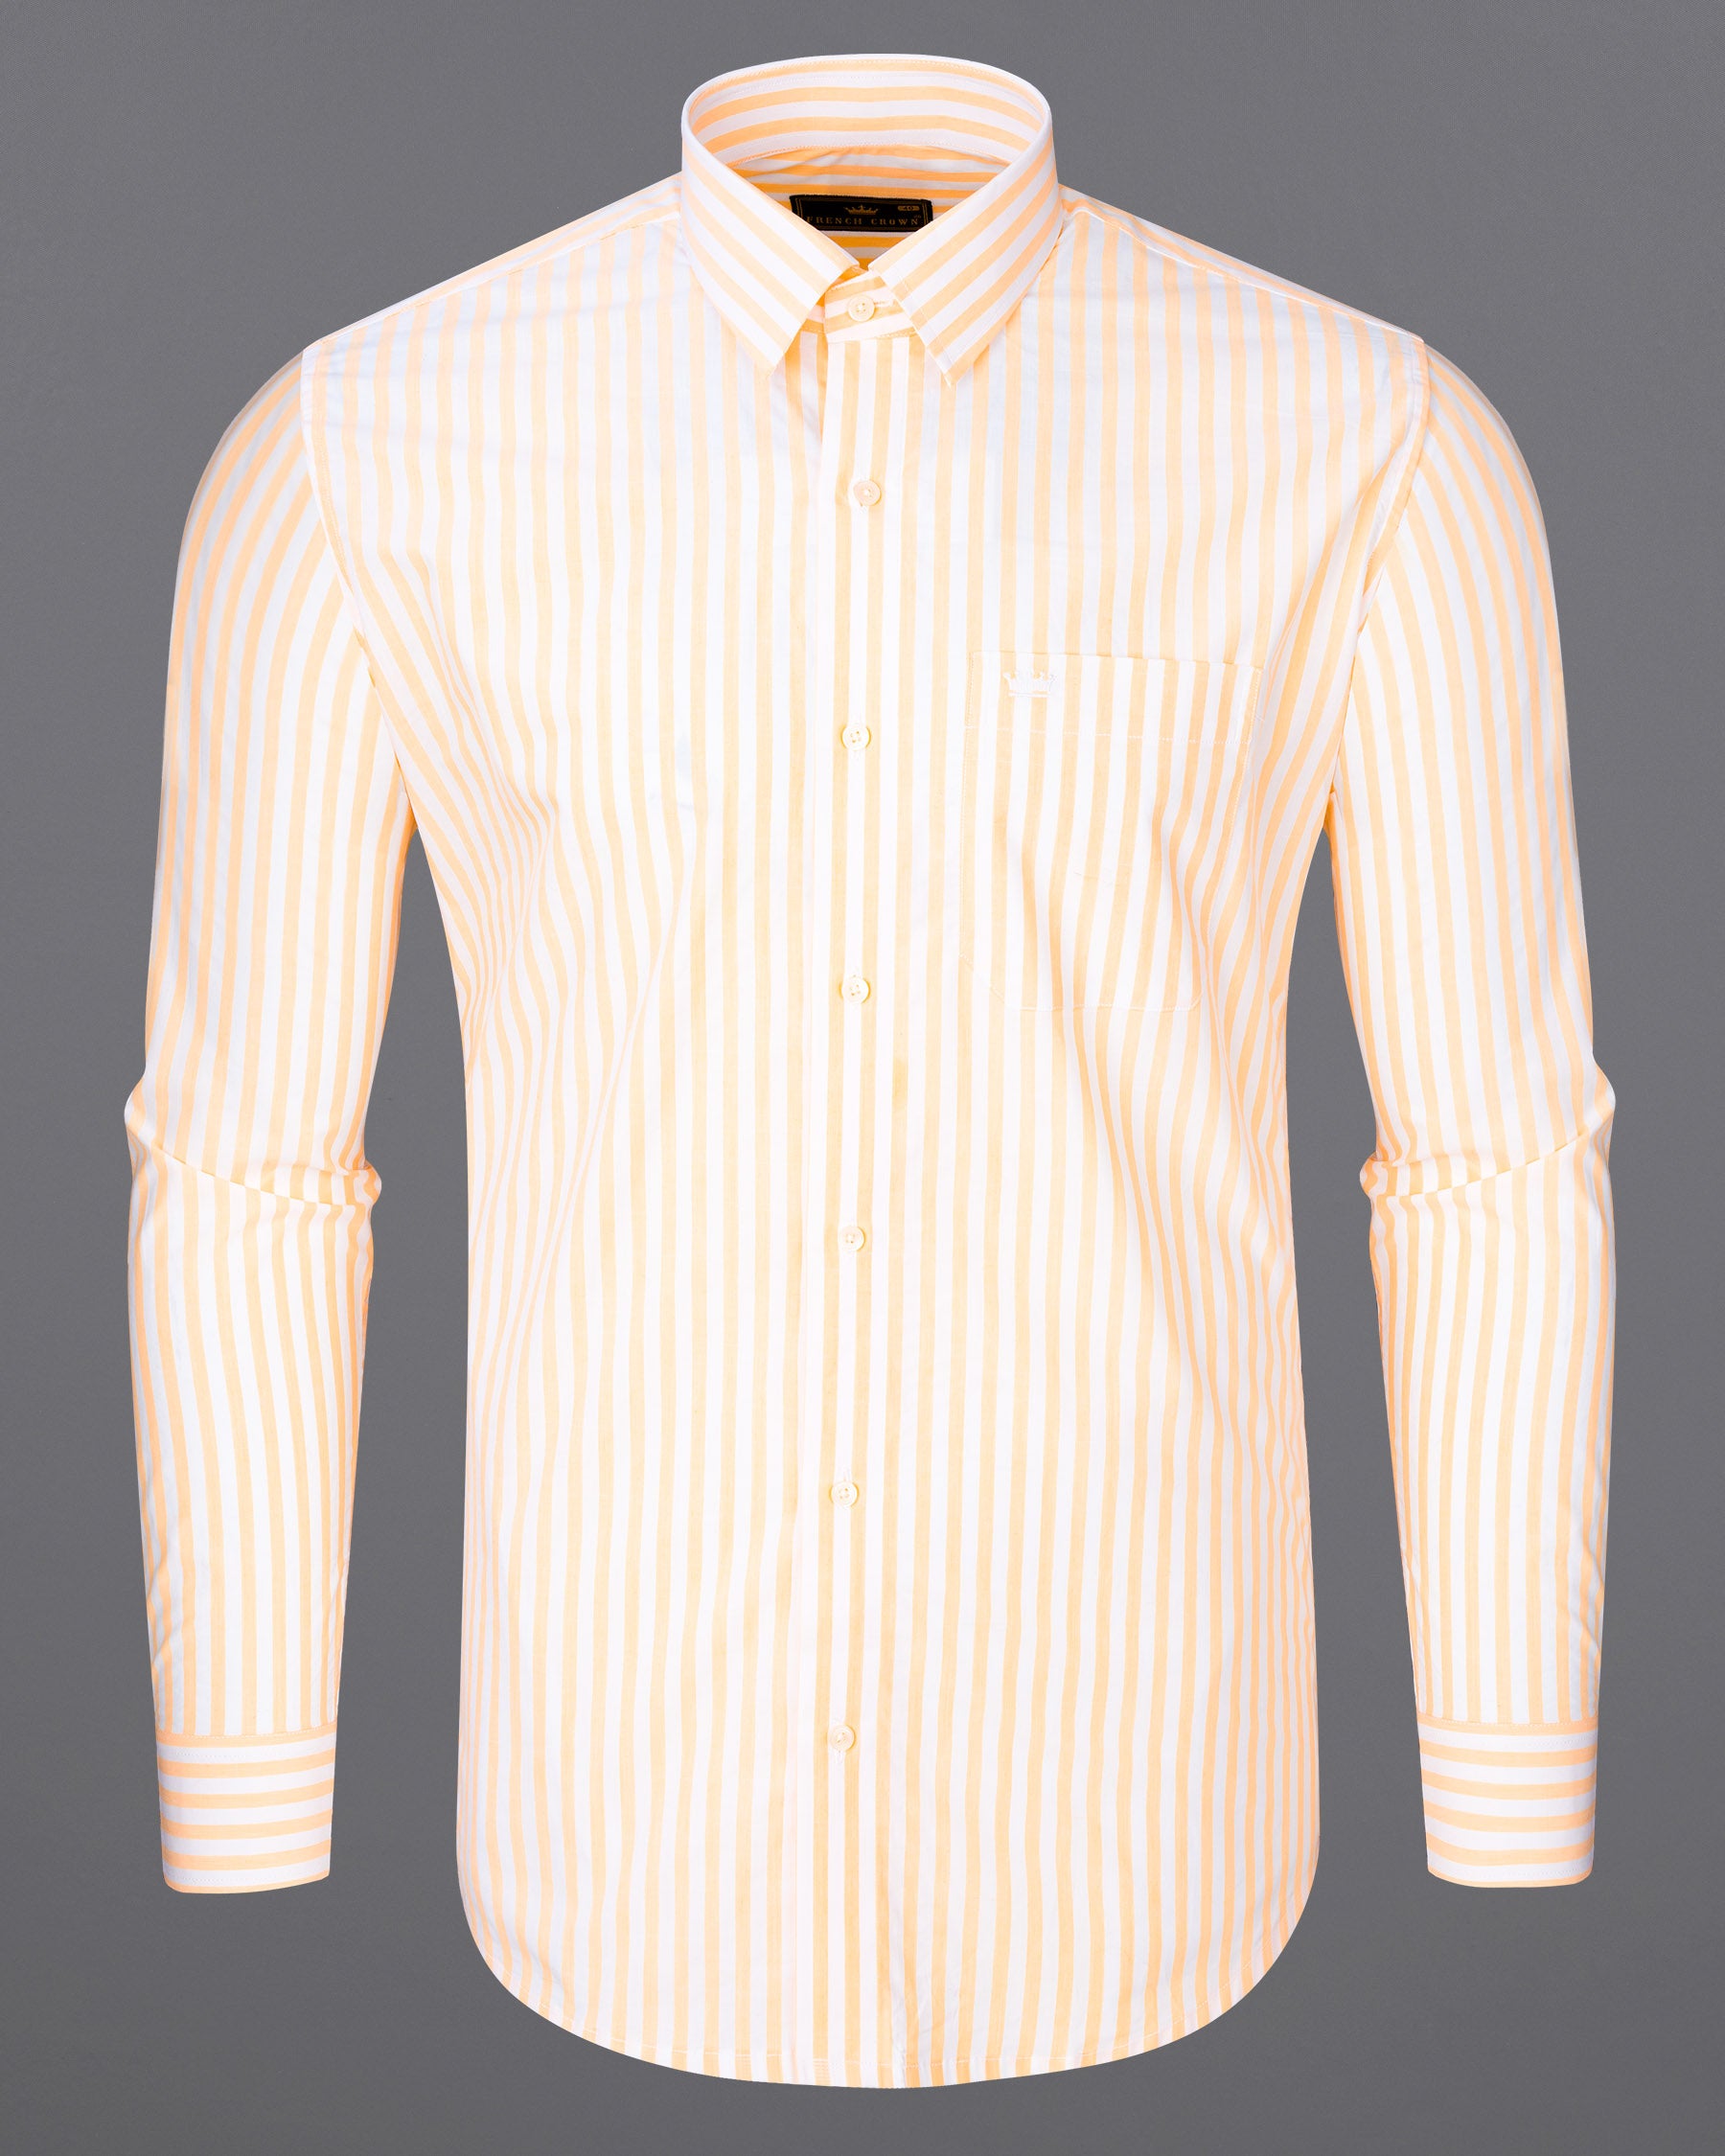 Tequila and White Striped Premium Cotton Shirt 7158-38,7158-H-38,7158-39,7158-H-39,7158-40,7158-H-40,7158-42,7158-H-42,7158-44,7158-H-44,7158-46,7158-H-46,7158-48,7158-H-48,7158-50,7158-H-50,7158-52,7158-H-52